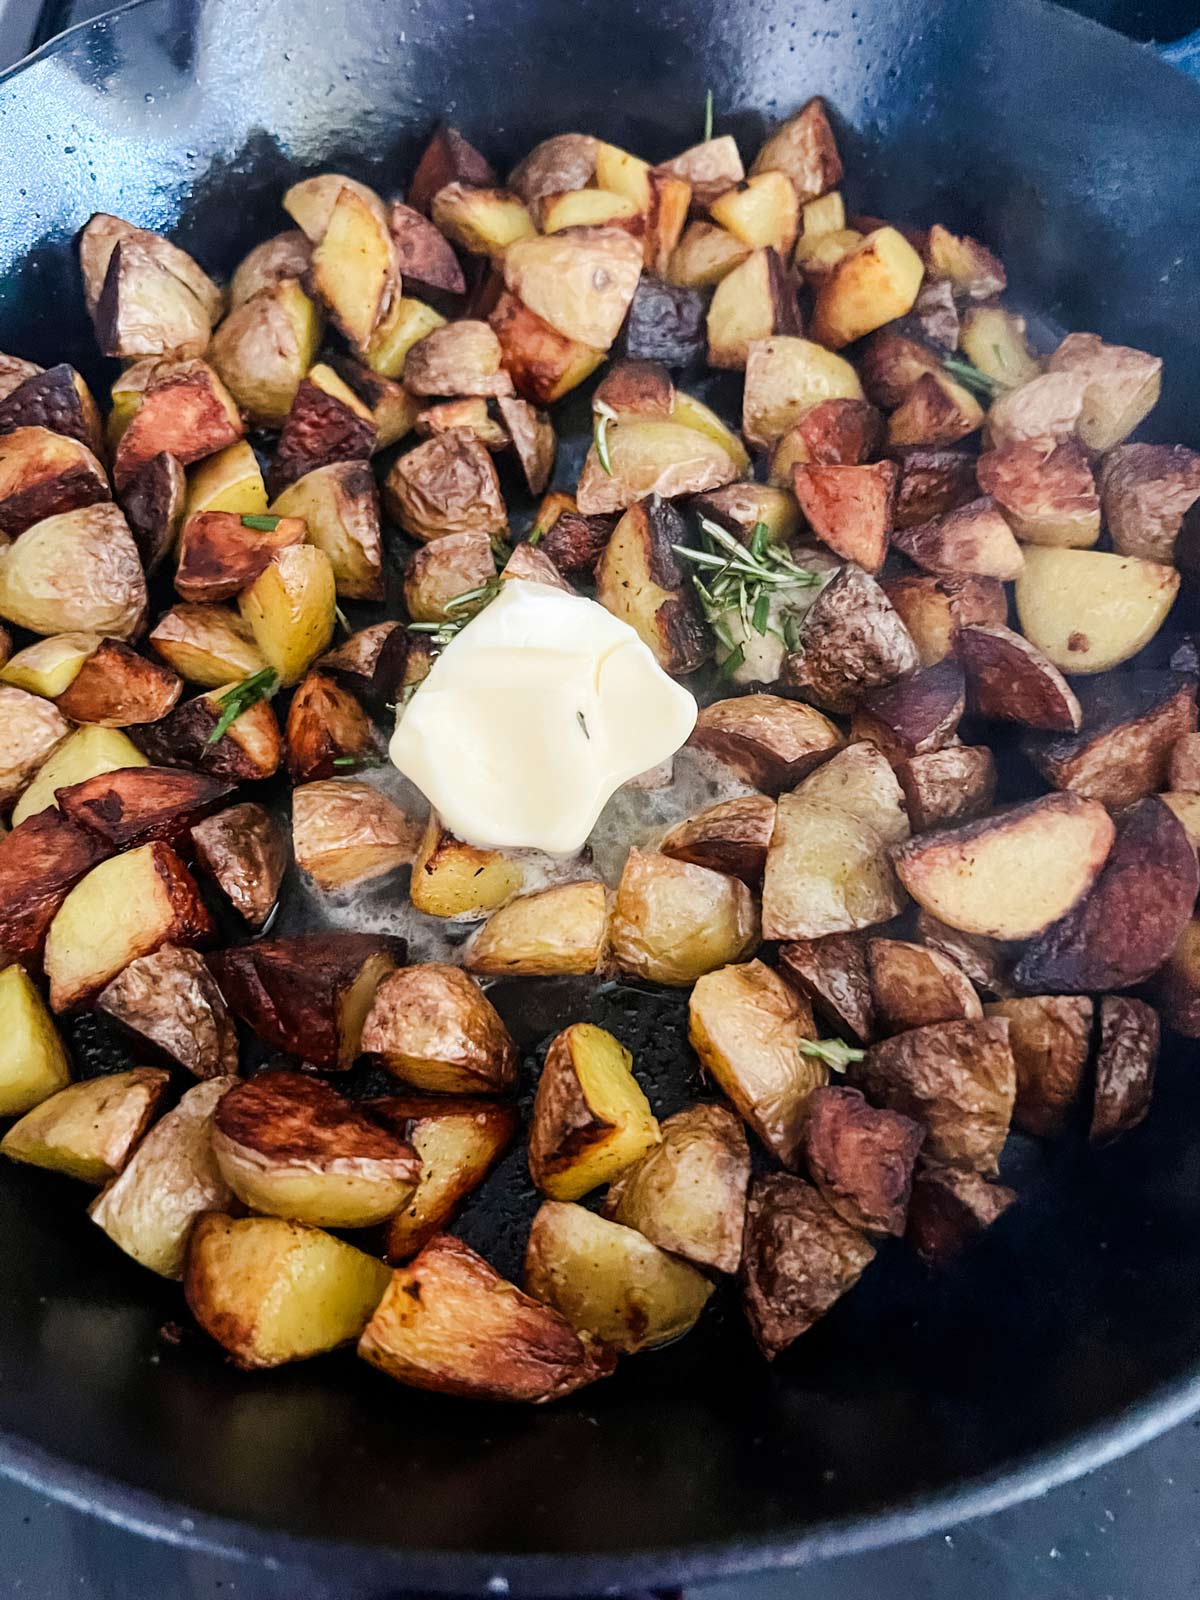 Butter and rosemary added to skillet potatoes.